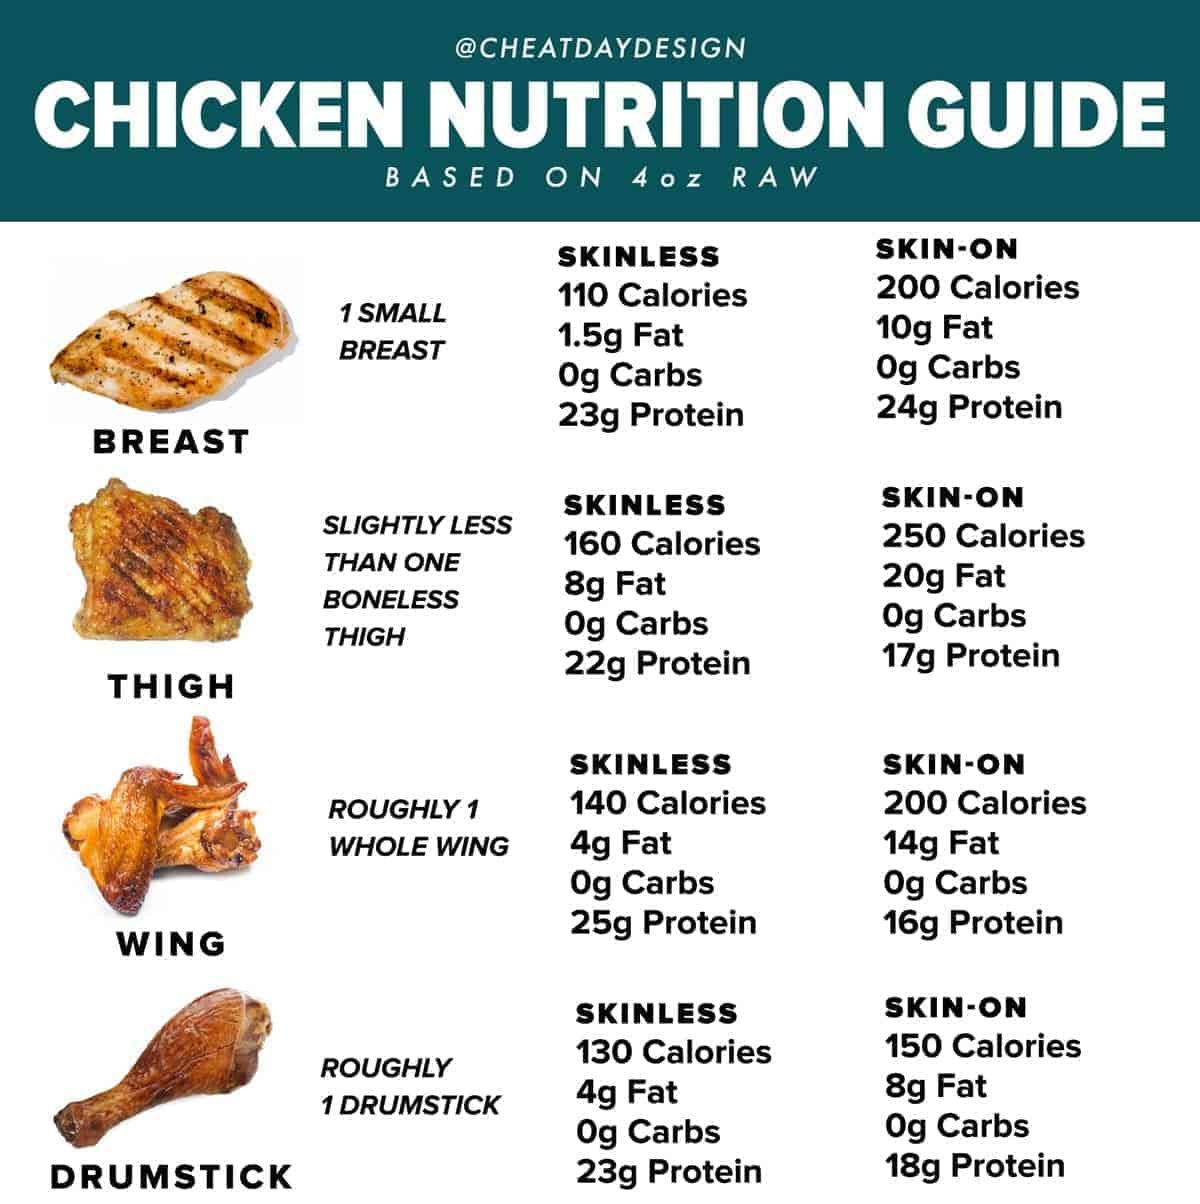 Calories in Different Parts of the Chicken